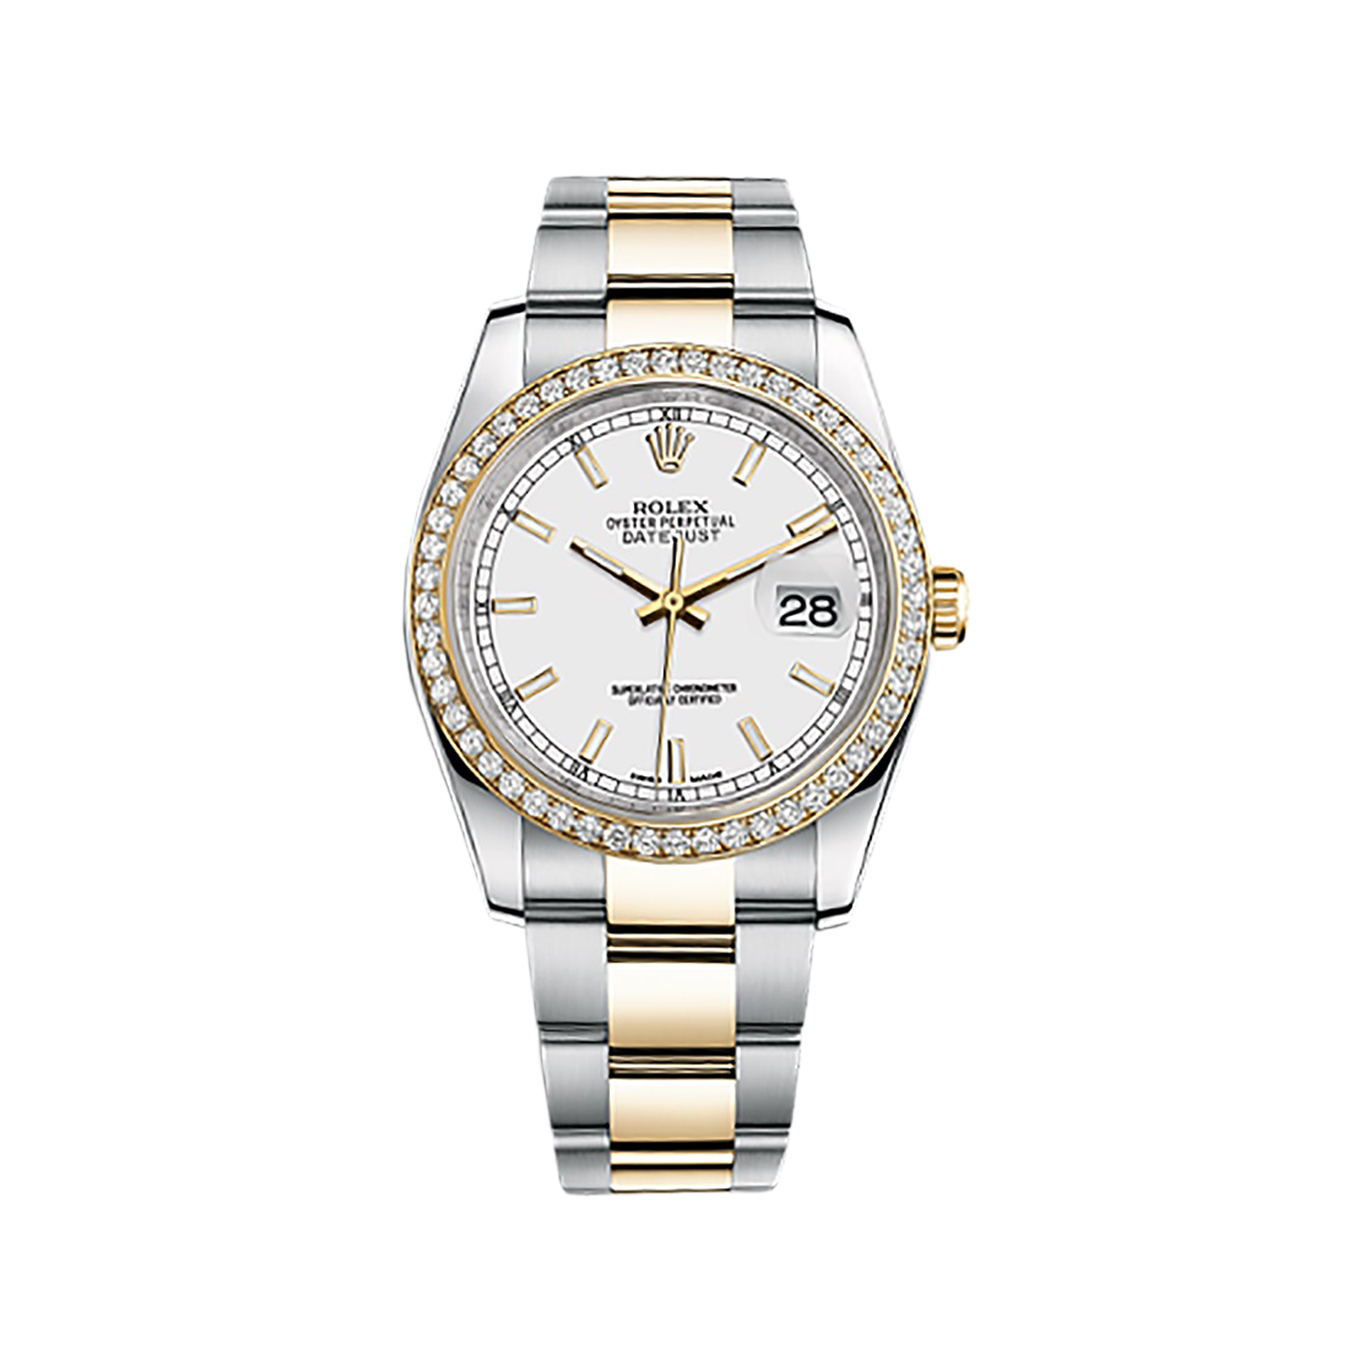 Datejust 36 116243 Gold & Stainless Steel Watch (White)